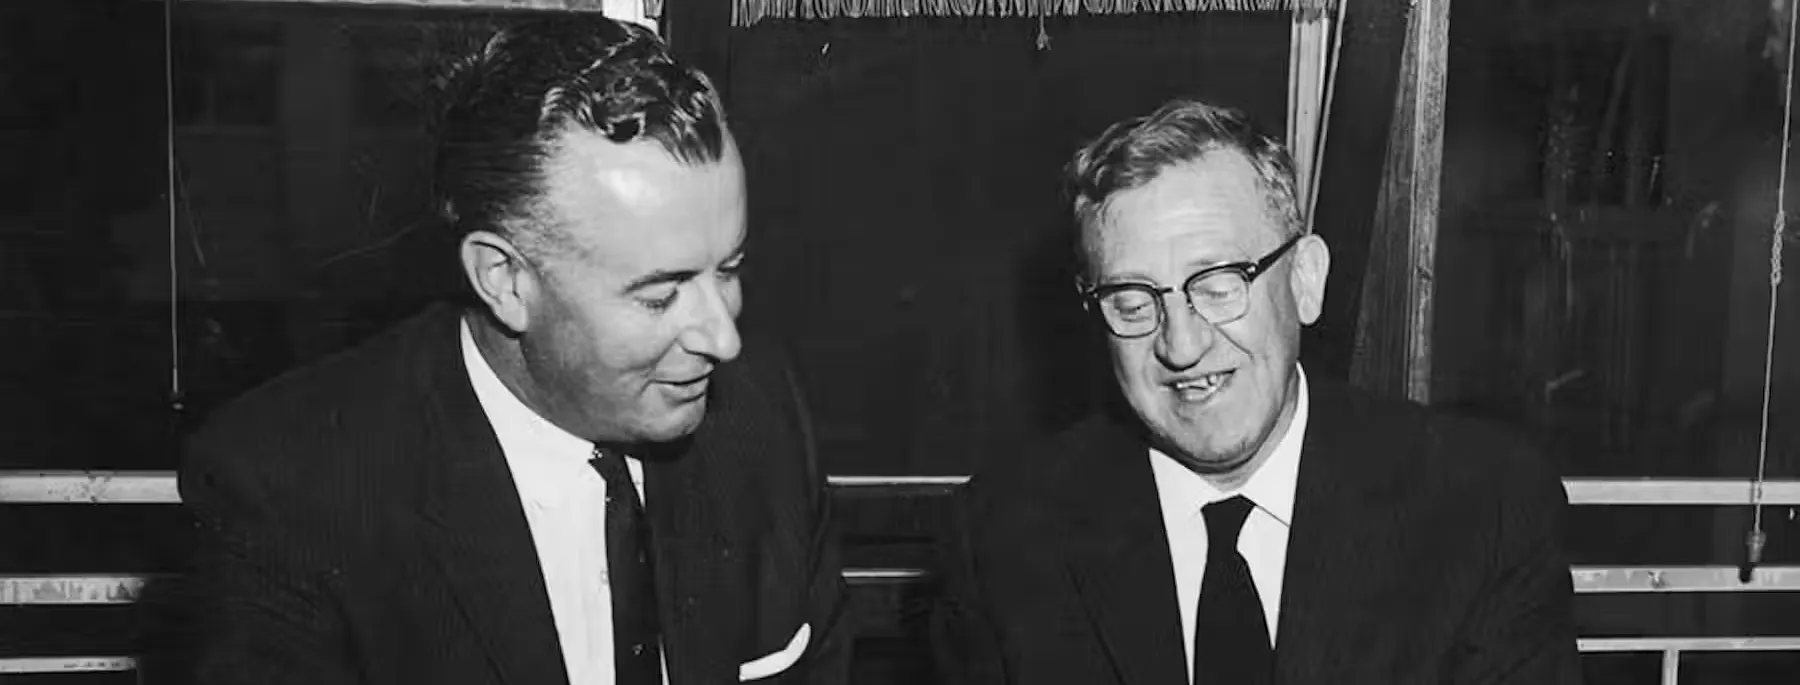 Gough Whitlam and Arthur Calwell sit next to each other, smiling, looking through paper documents together.